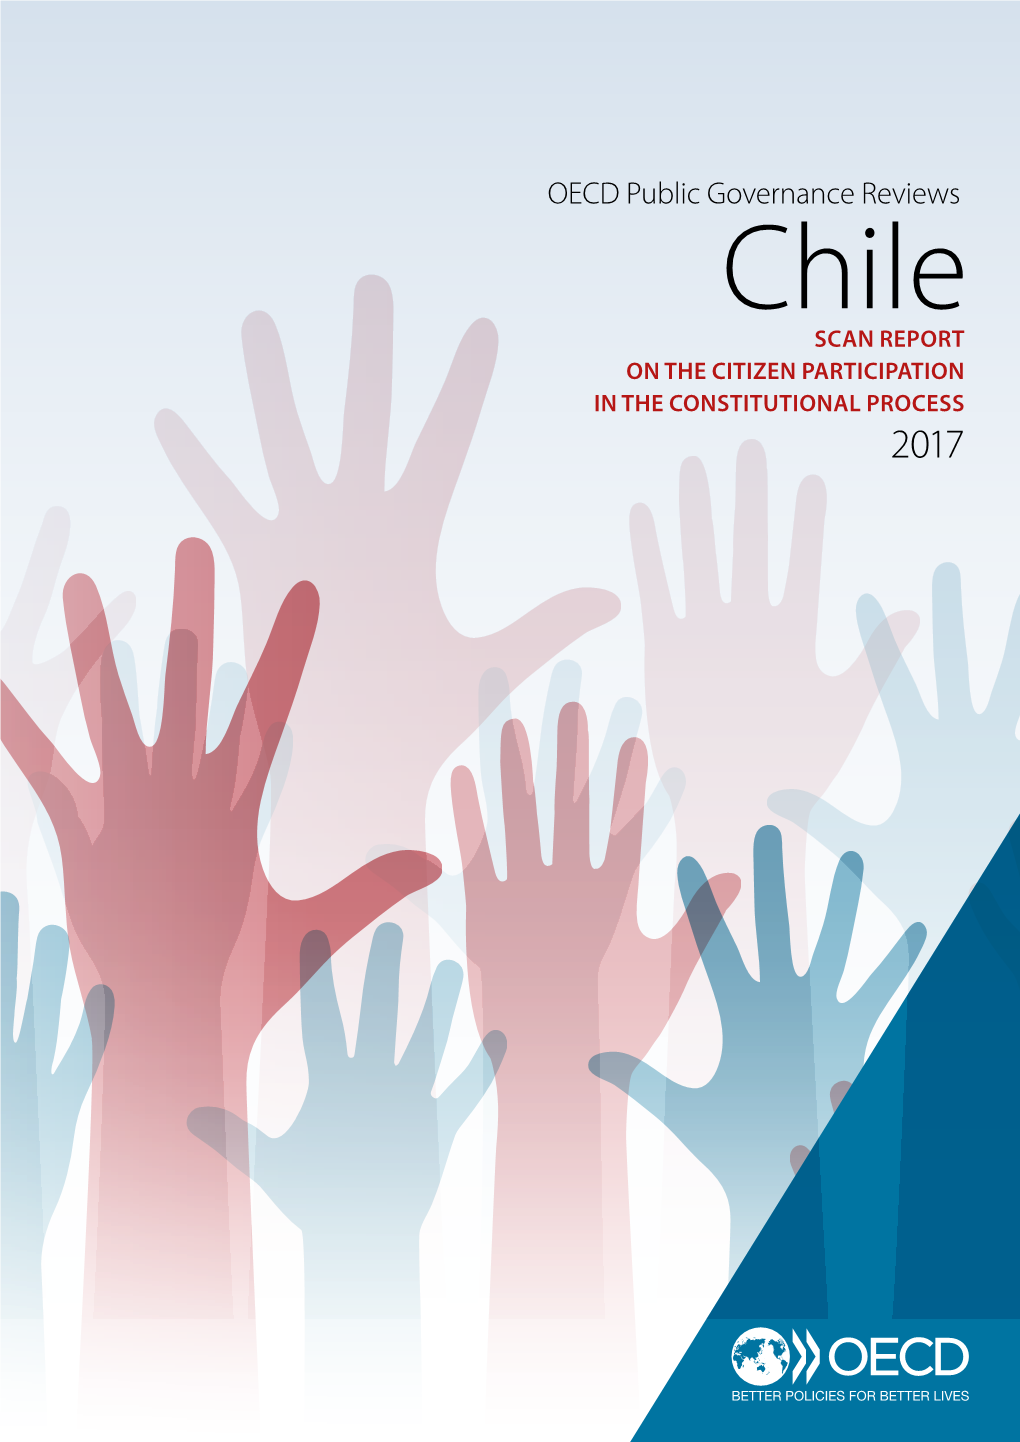 OECD Public Governance Reviews Chile SCAN REPORT on the CITIZEN PARTICIPATION in the CONSTITUTIONAL PROCESS 2017